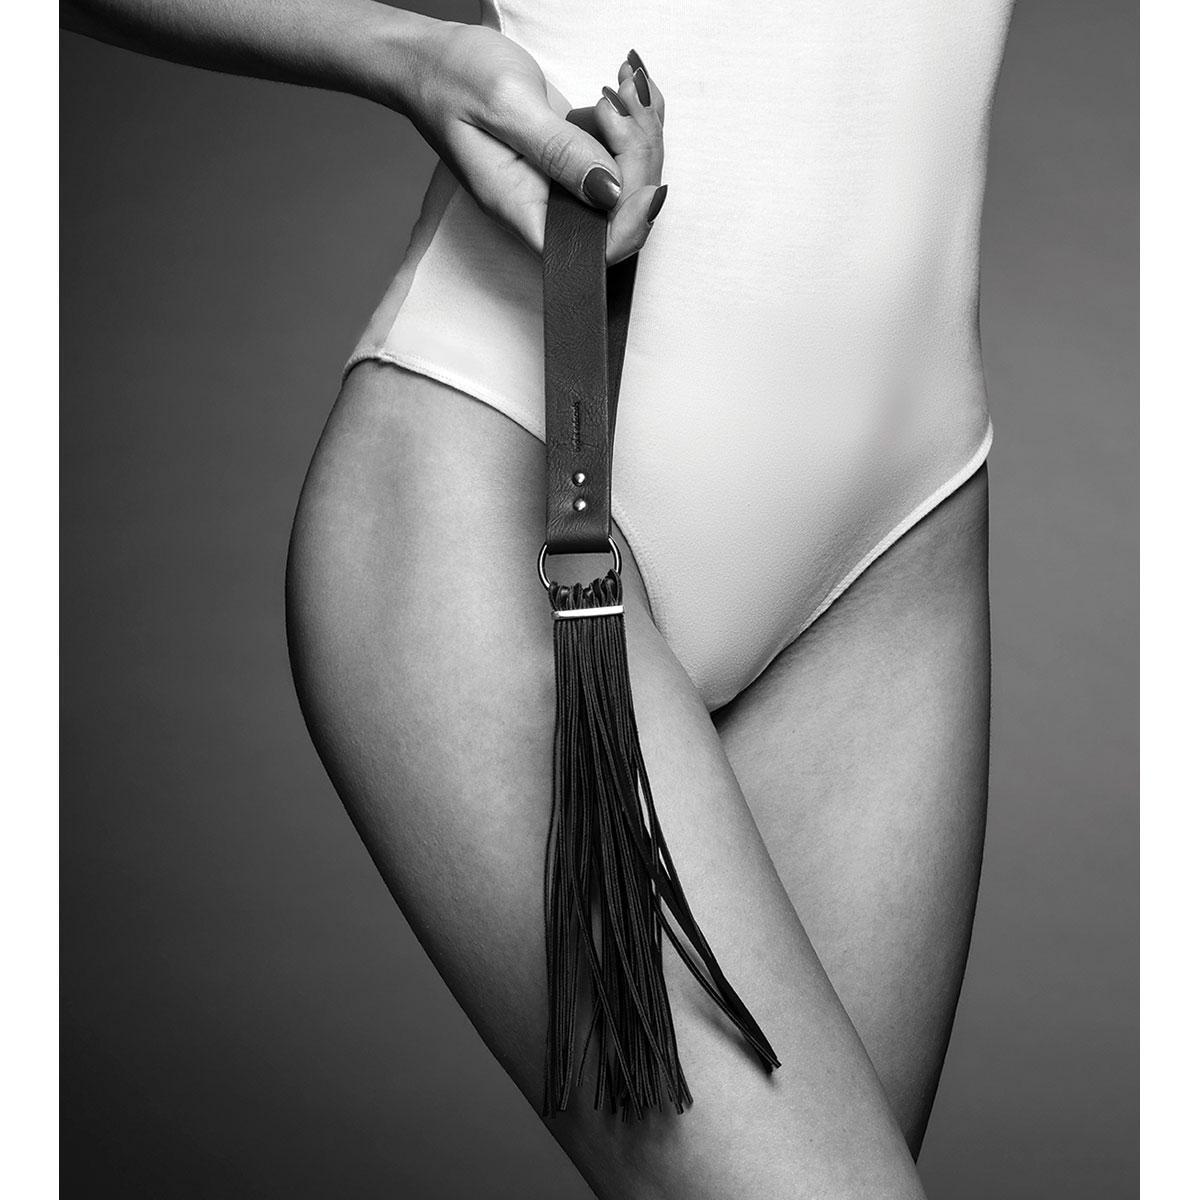 Bijoux Indiscrets Maze Tassel Flogger - Buy At Luxury Toy X - Free 3-Day Shipping